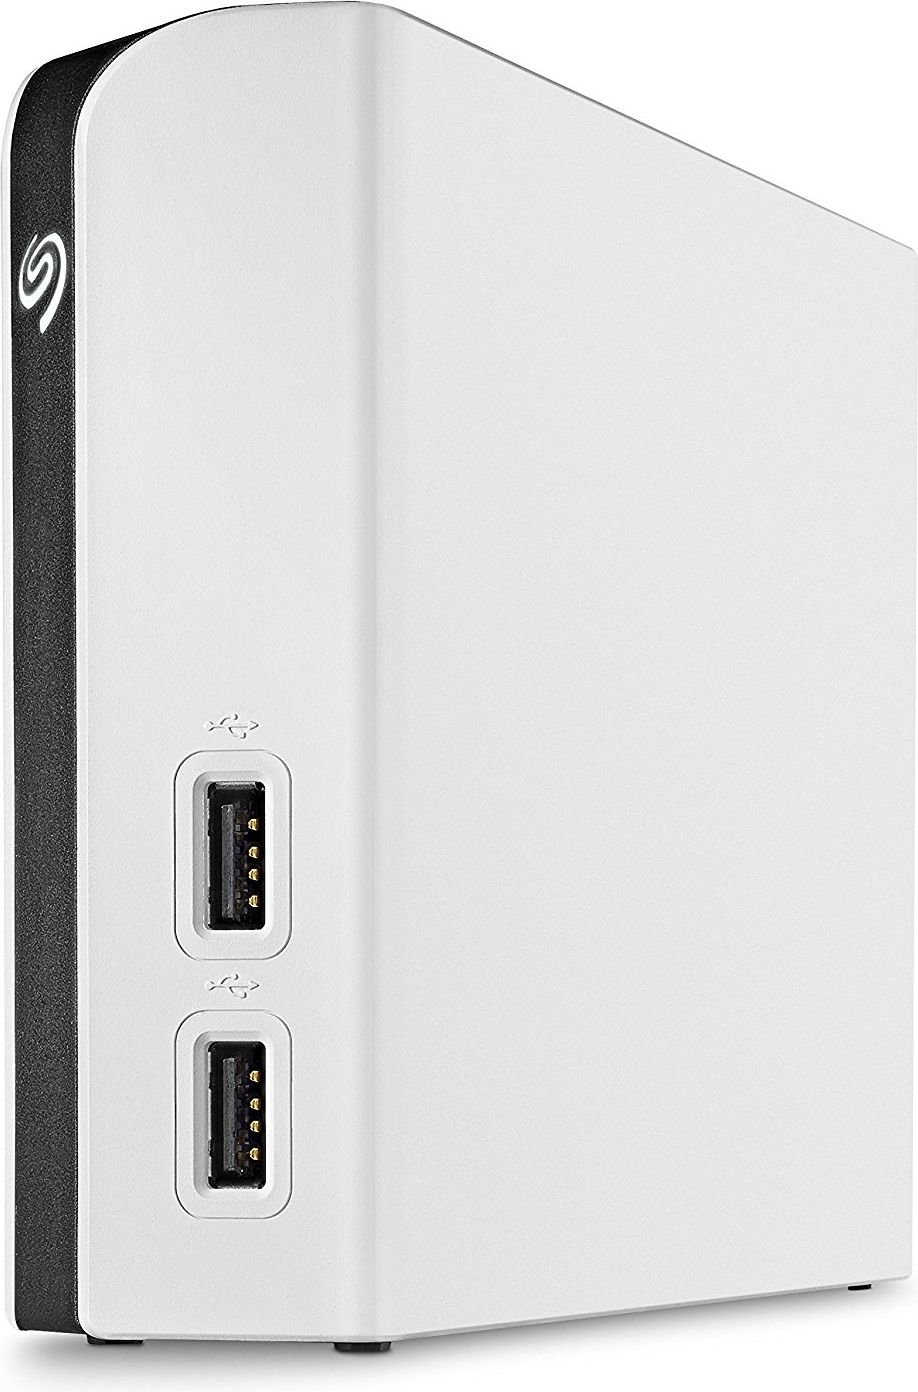 Hard Disk-uri externe - HDD Extern Seagate Game Drive 8TB, 3.5&quot;, USB 3.0, Hub USB, Designed for Xbox